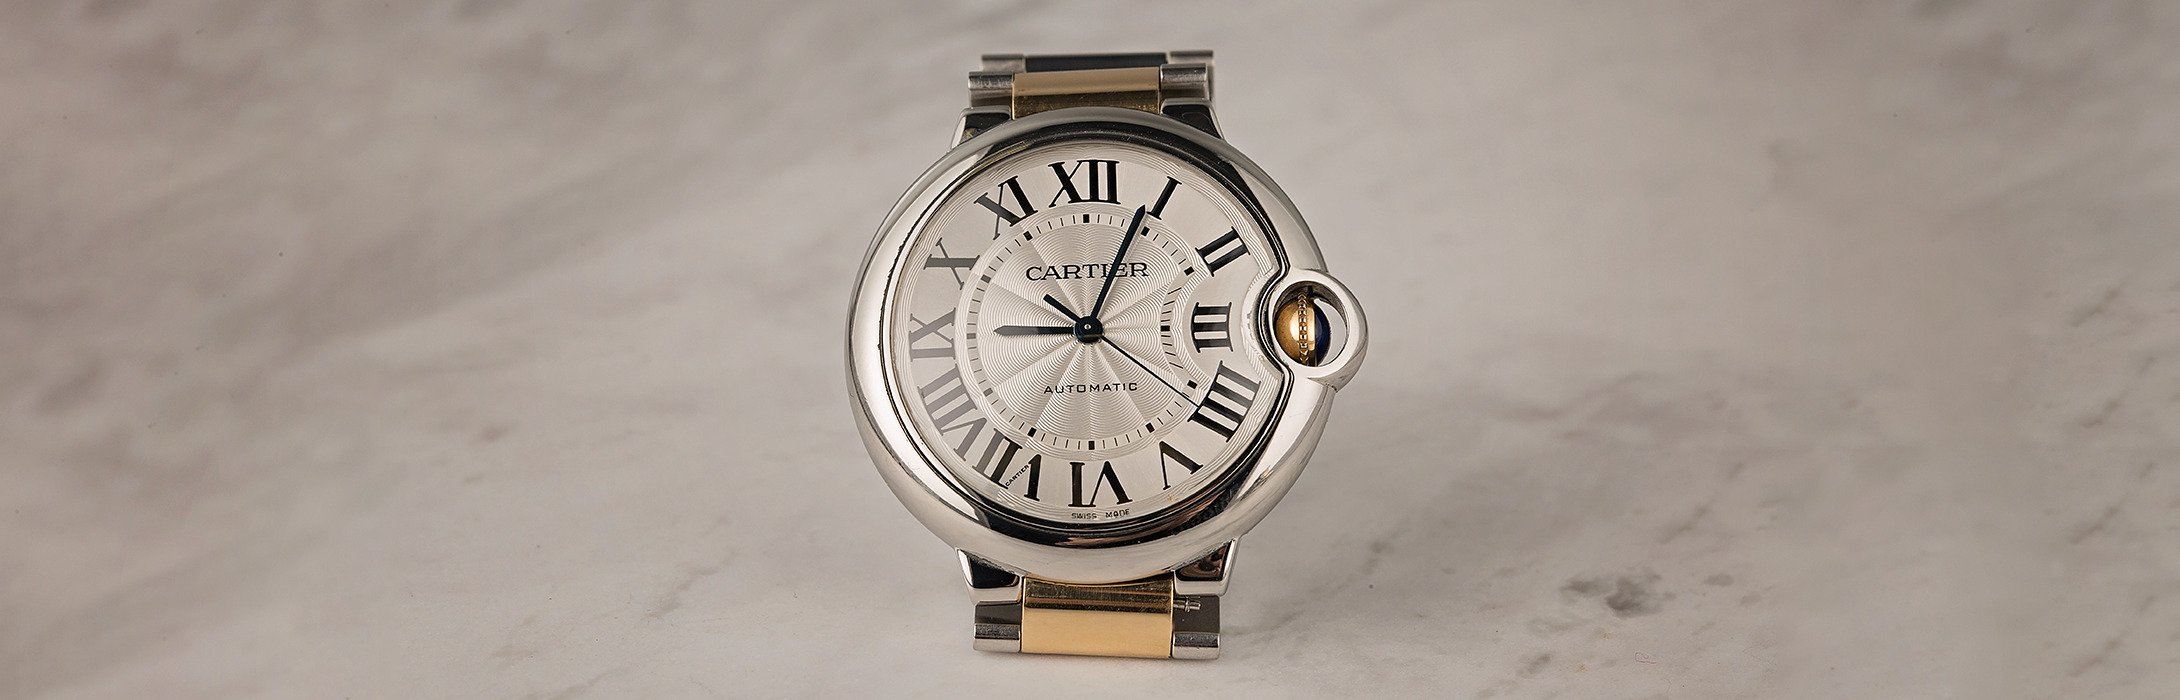 Cartier Watches, Jewelry Prices to Rise;CEO Sees Luxury Demand